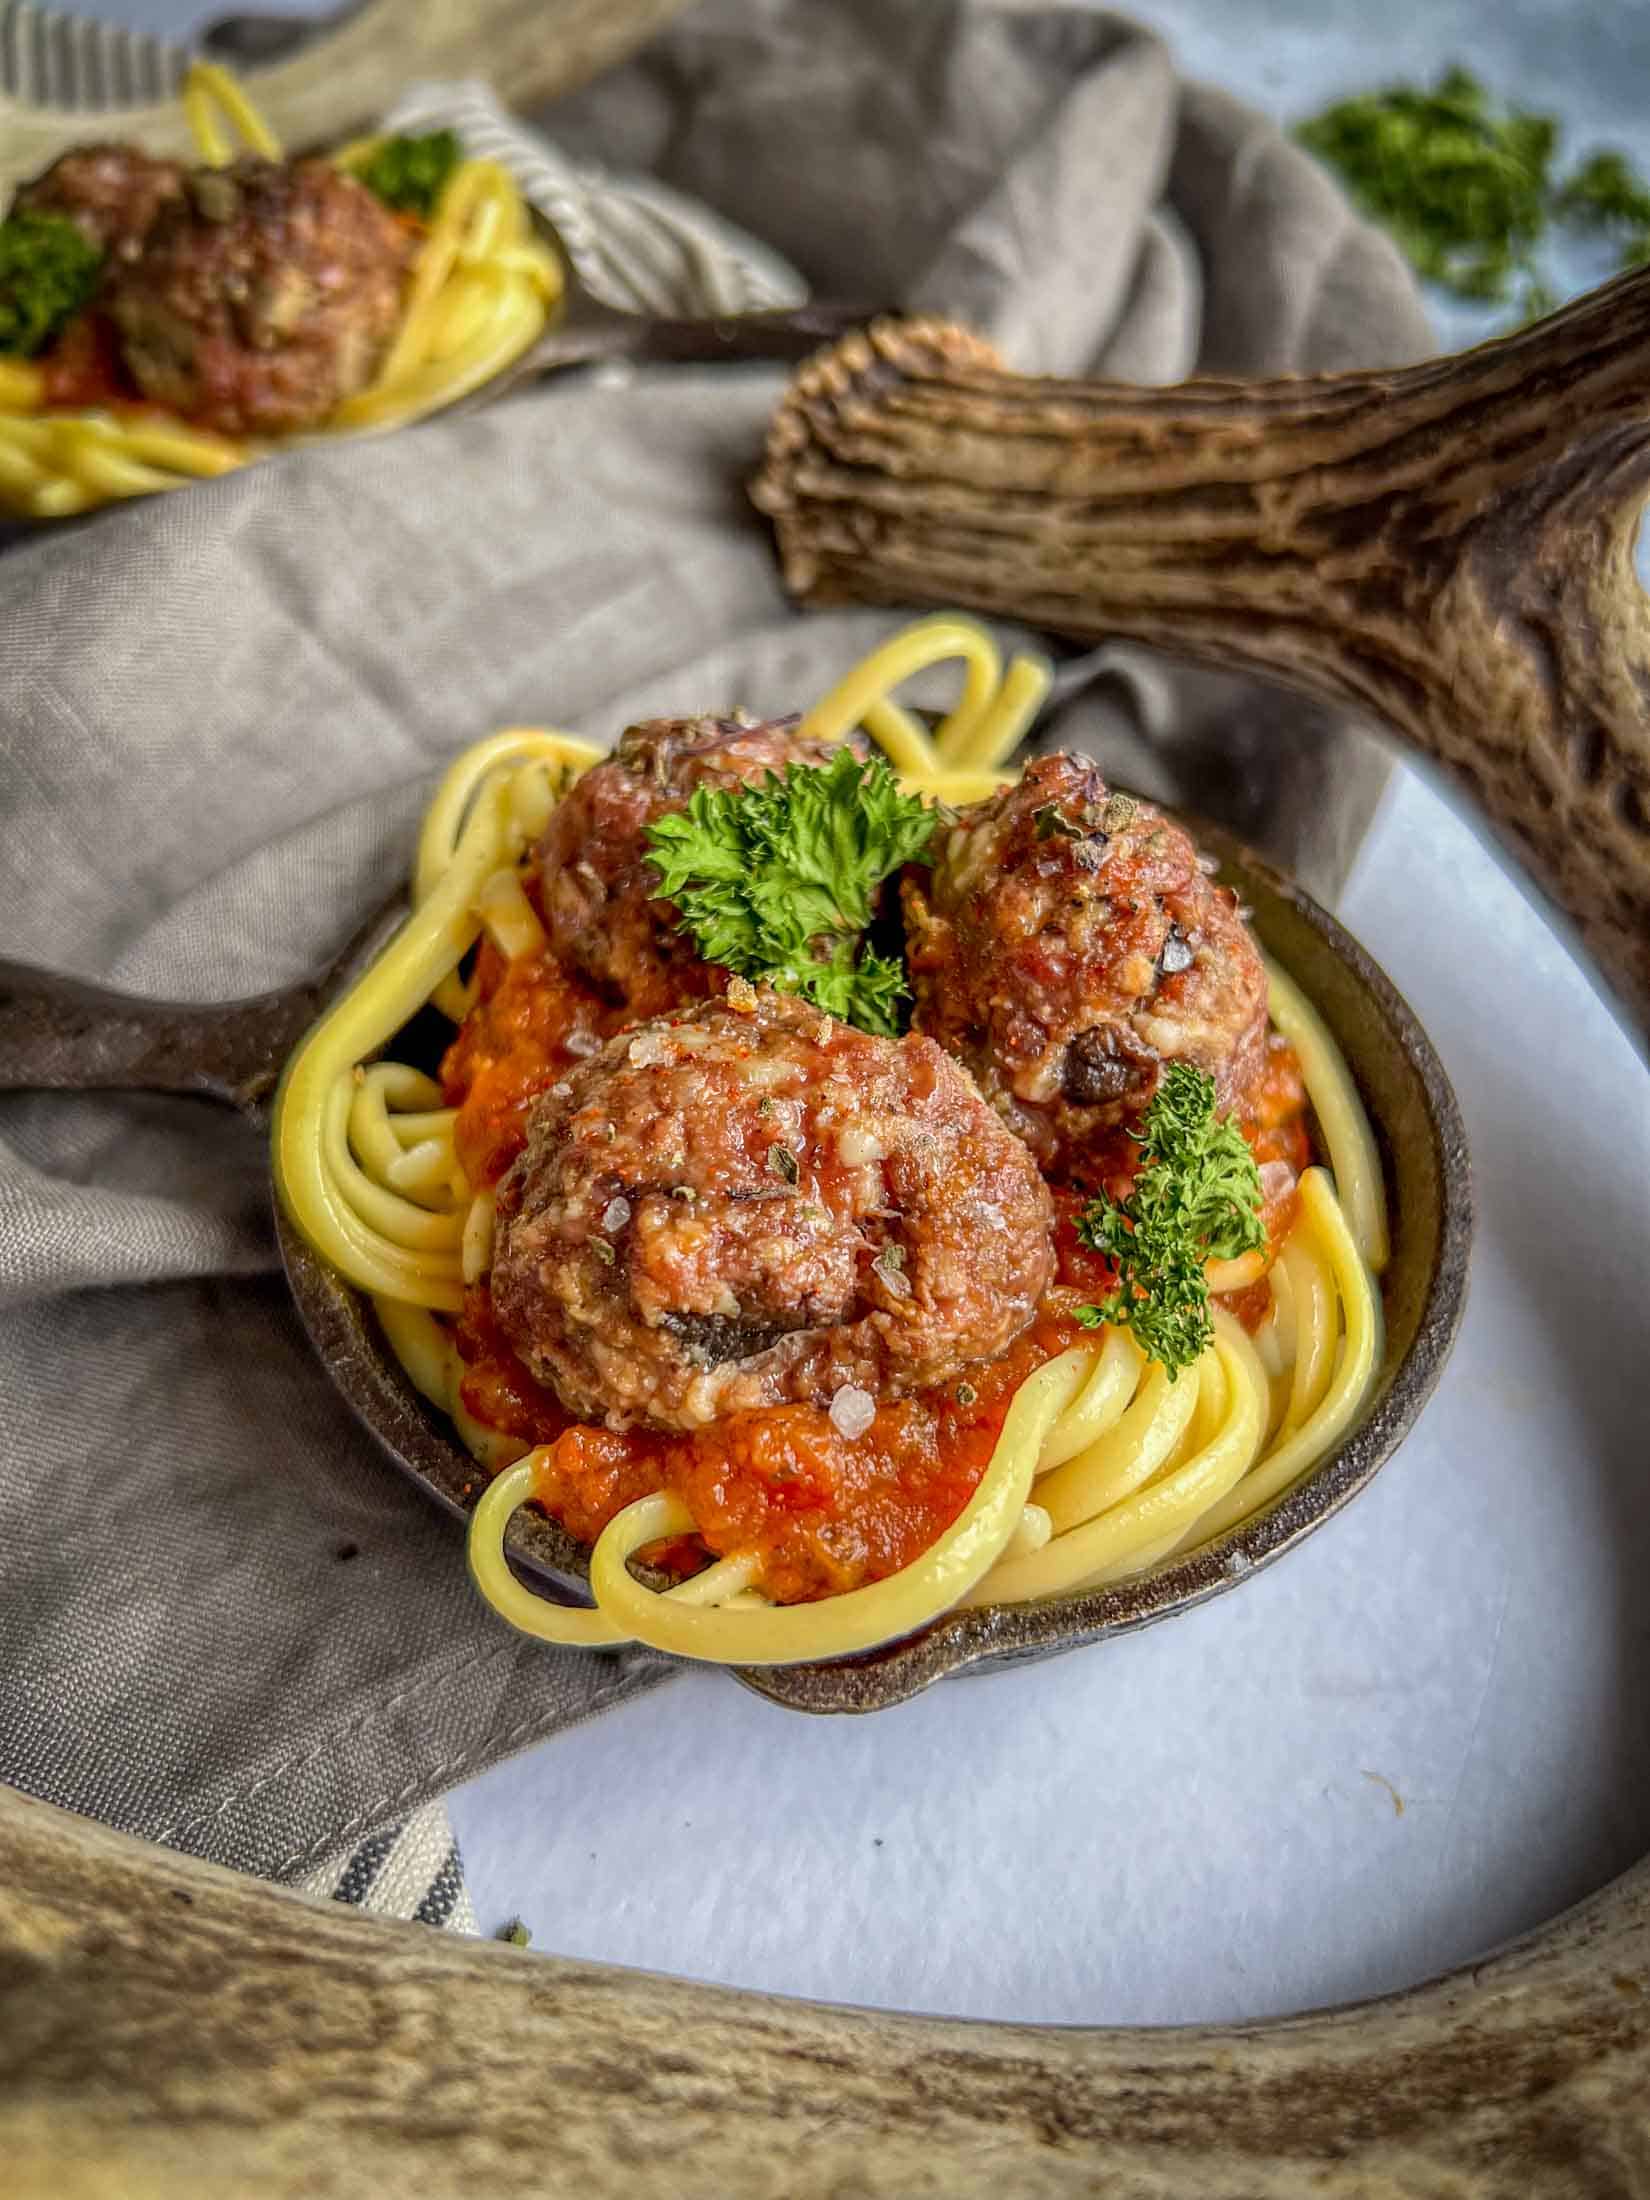 Two venison meatballs nestled into noodles with marinara sauce and parsley garnishing the top.